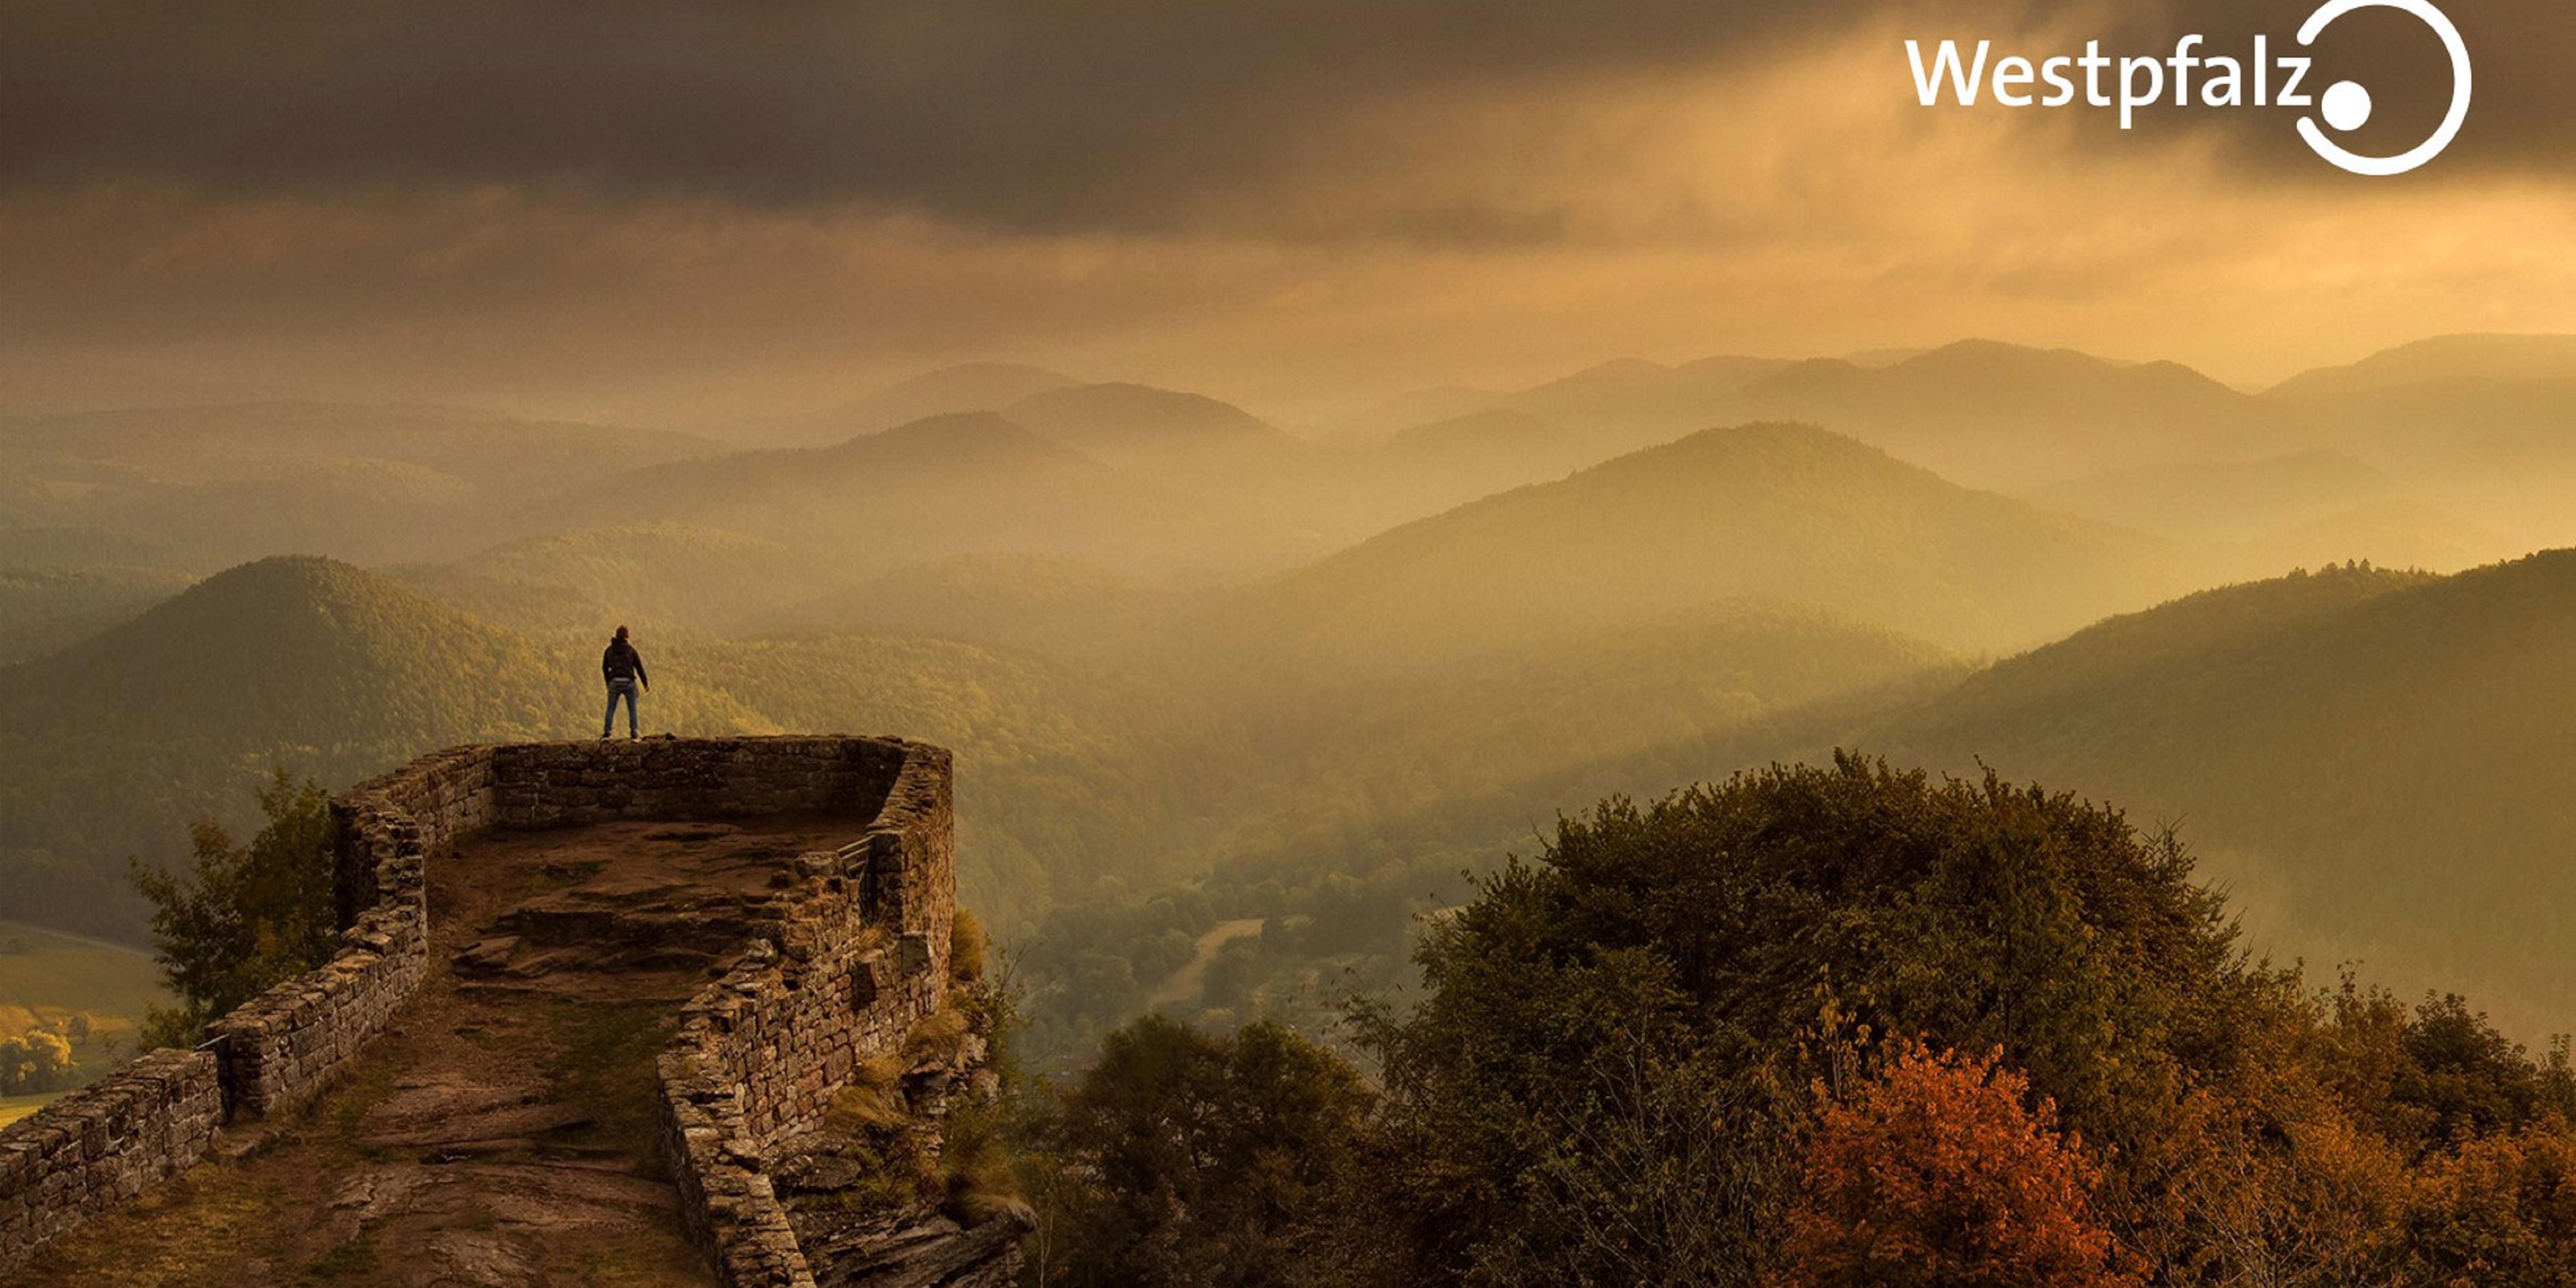 Extensive forests, gentle hills, castles steeped in legend and romantic villages: The West Palatinate is a region for adventurers, sports aficionados and nature lovers. People here know how to enjoy life: Palatinate joie de vivre and hospitality meet French savoir-vivre.